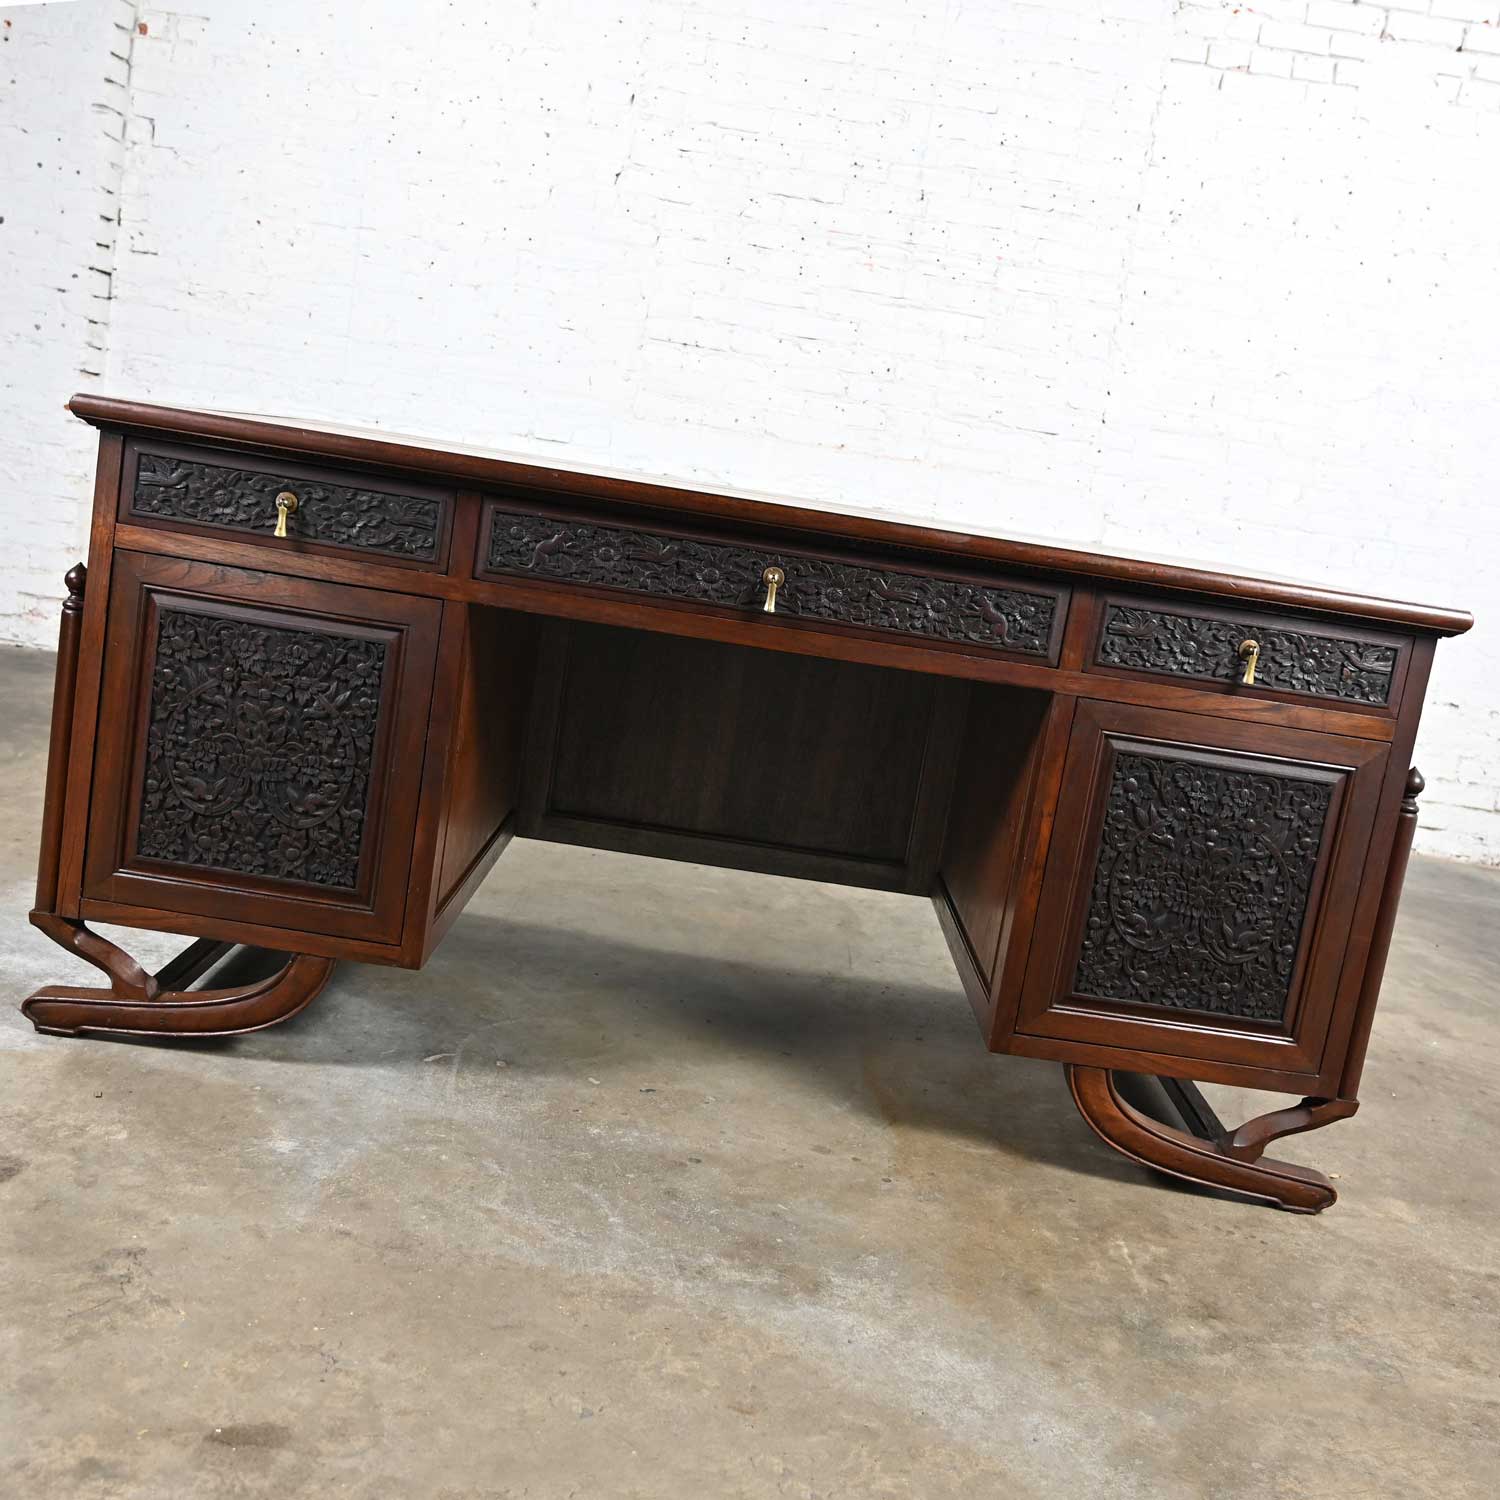 Vintage Chinoiserie Hand Carved Rosewood Desk from Bangkok Thailand